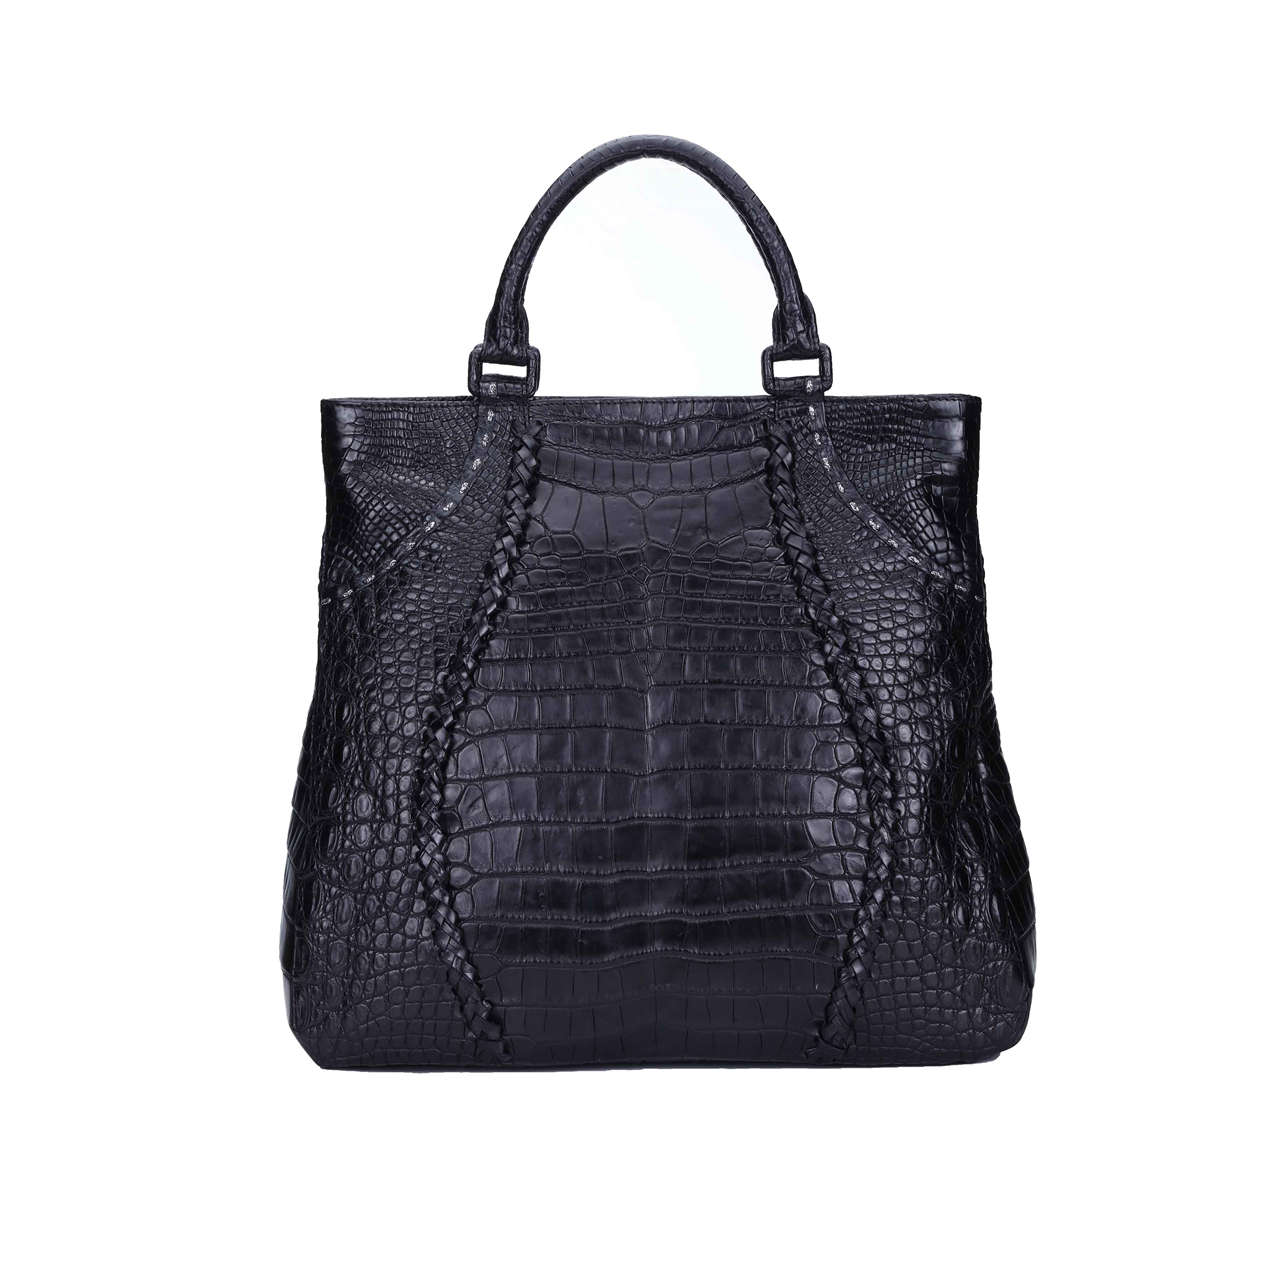 Professional Tote Handbags & High Quality Briefcase On GF Bags